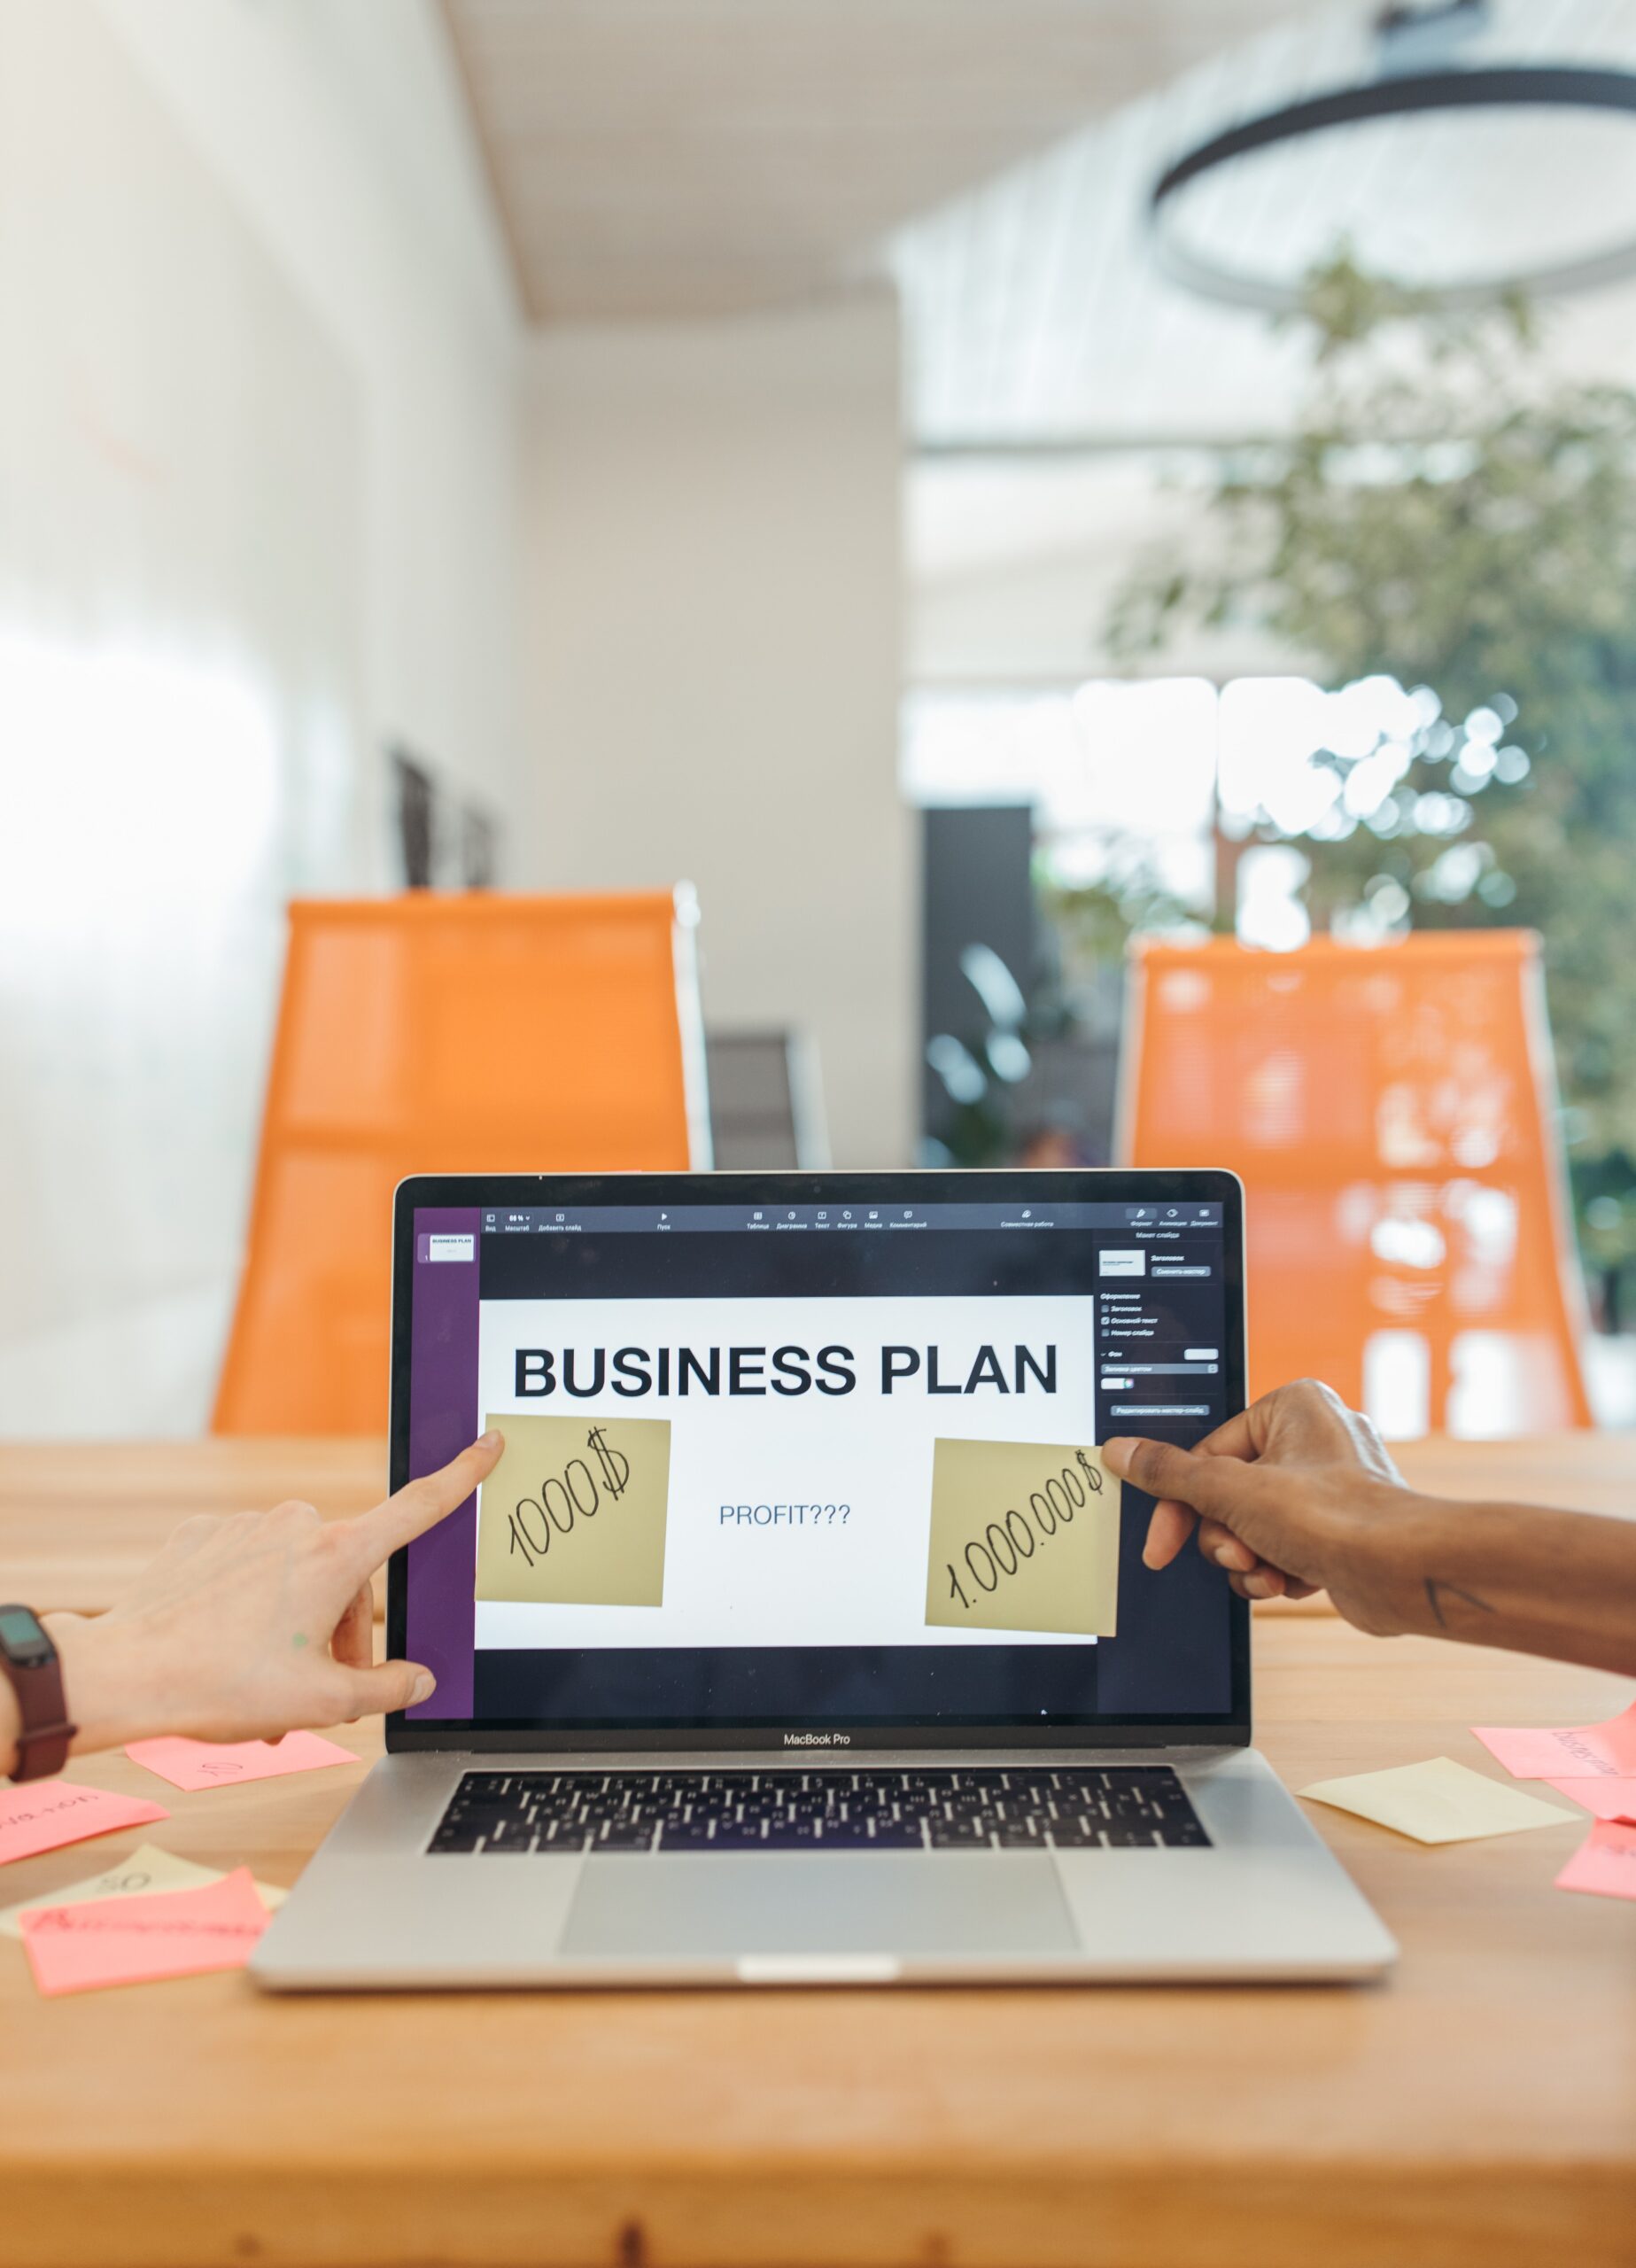 How to optimise your time when you write a business plan?